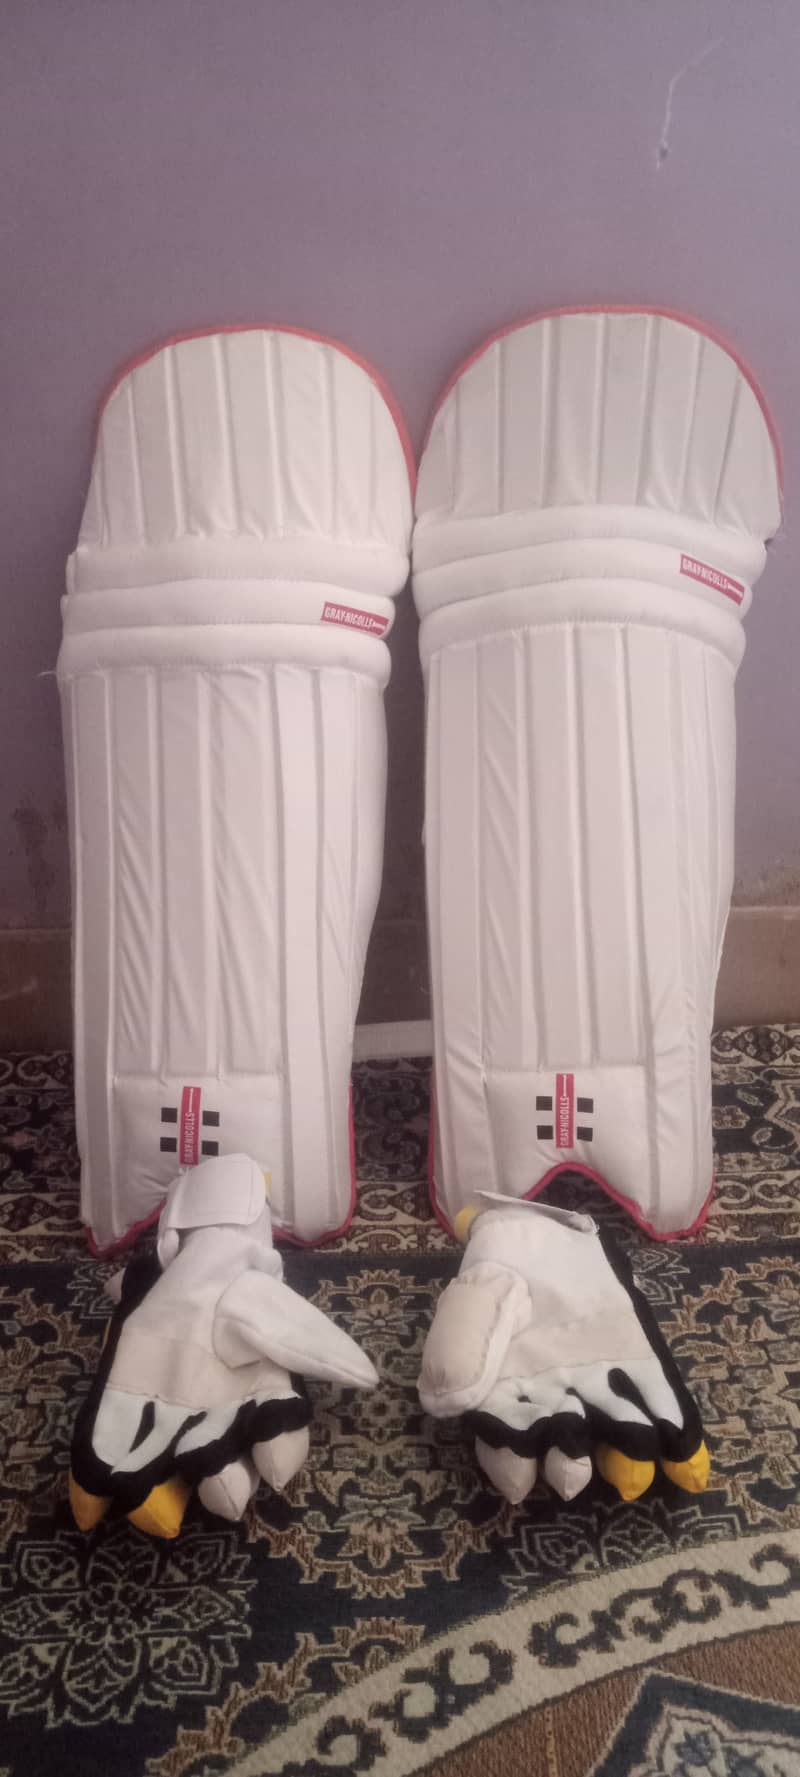 Cricket pad & gloves with bag 6